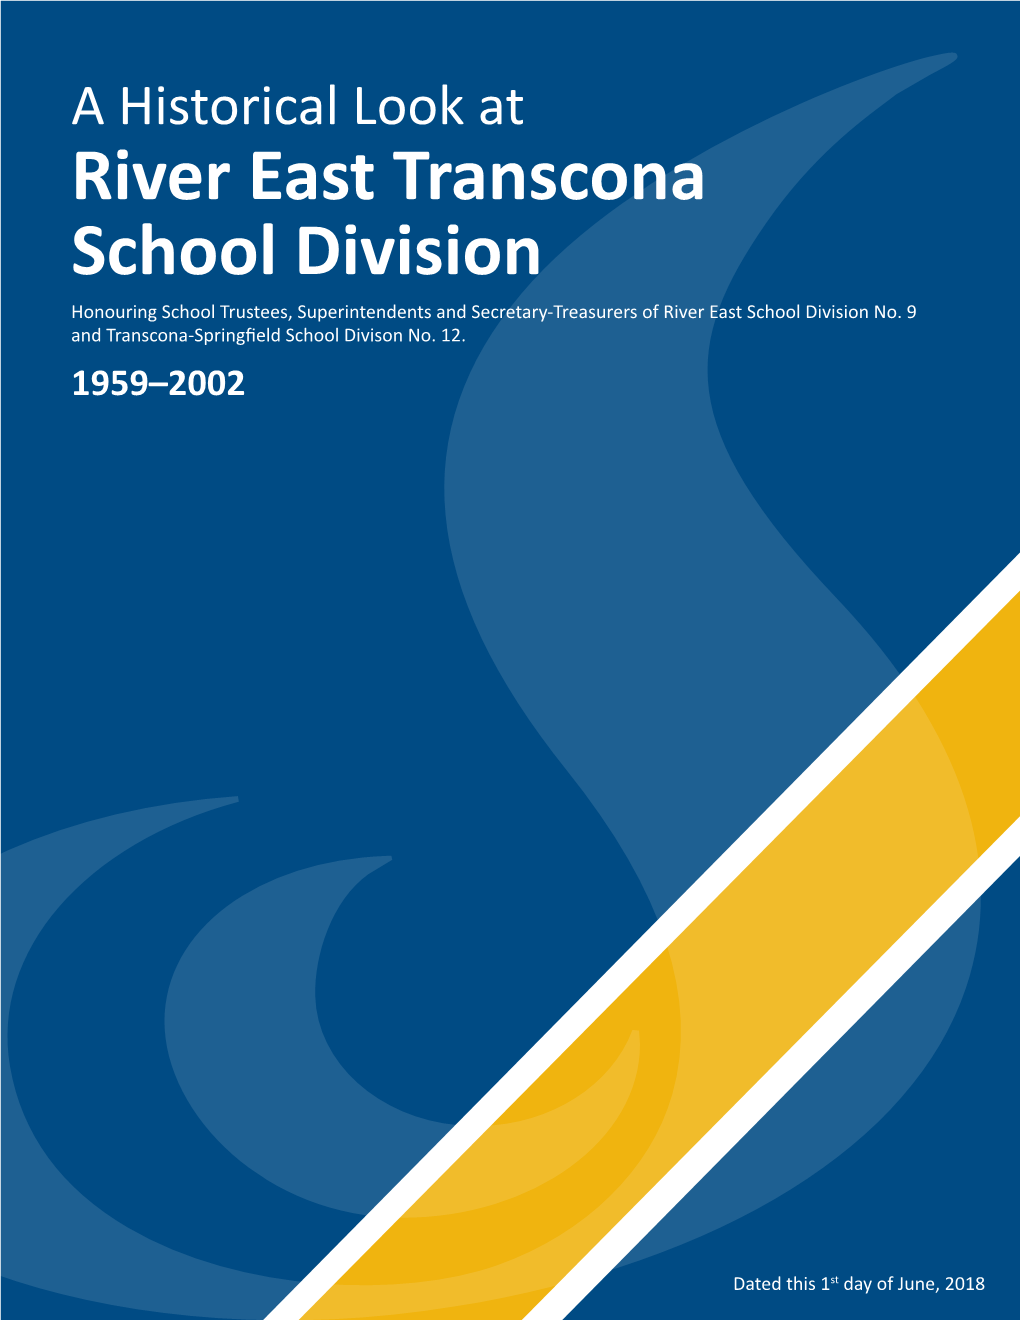 A Historical Look at River East Transcona School Division Honouring School Trustees, Superintendents and Secretary-Treasurers of River East School Division No